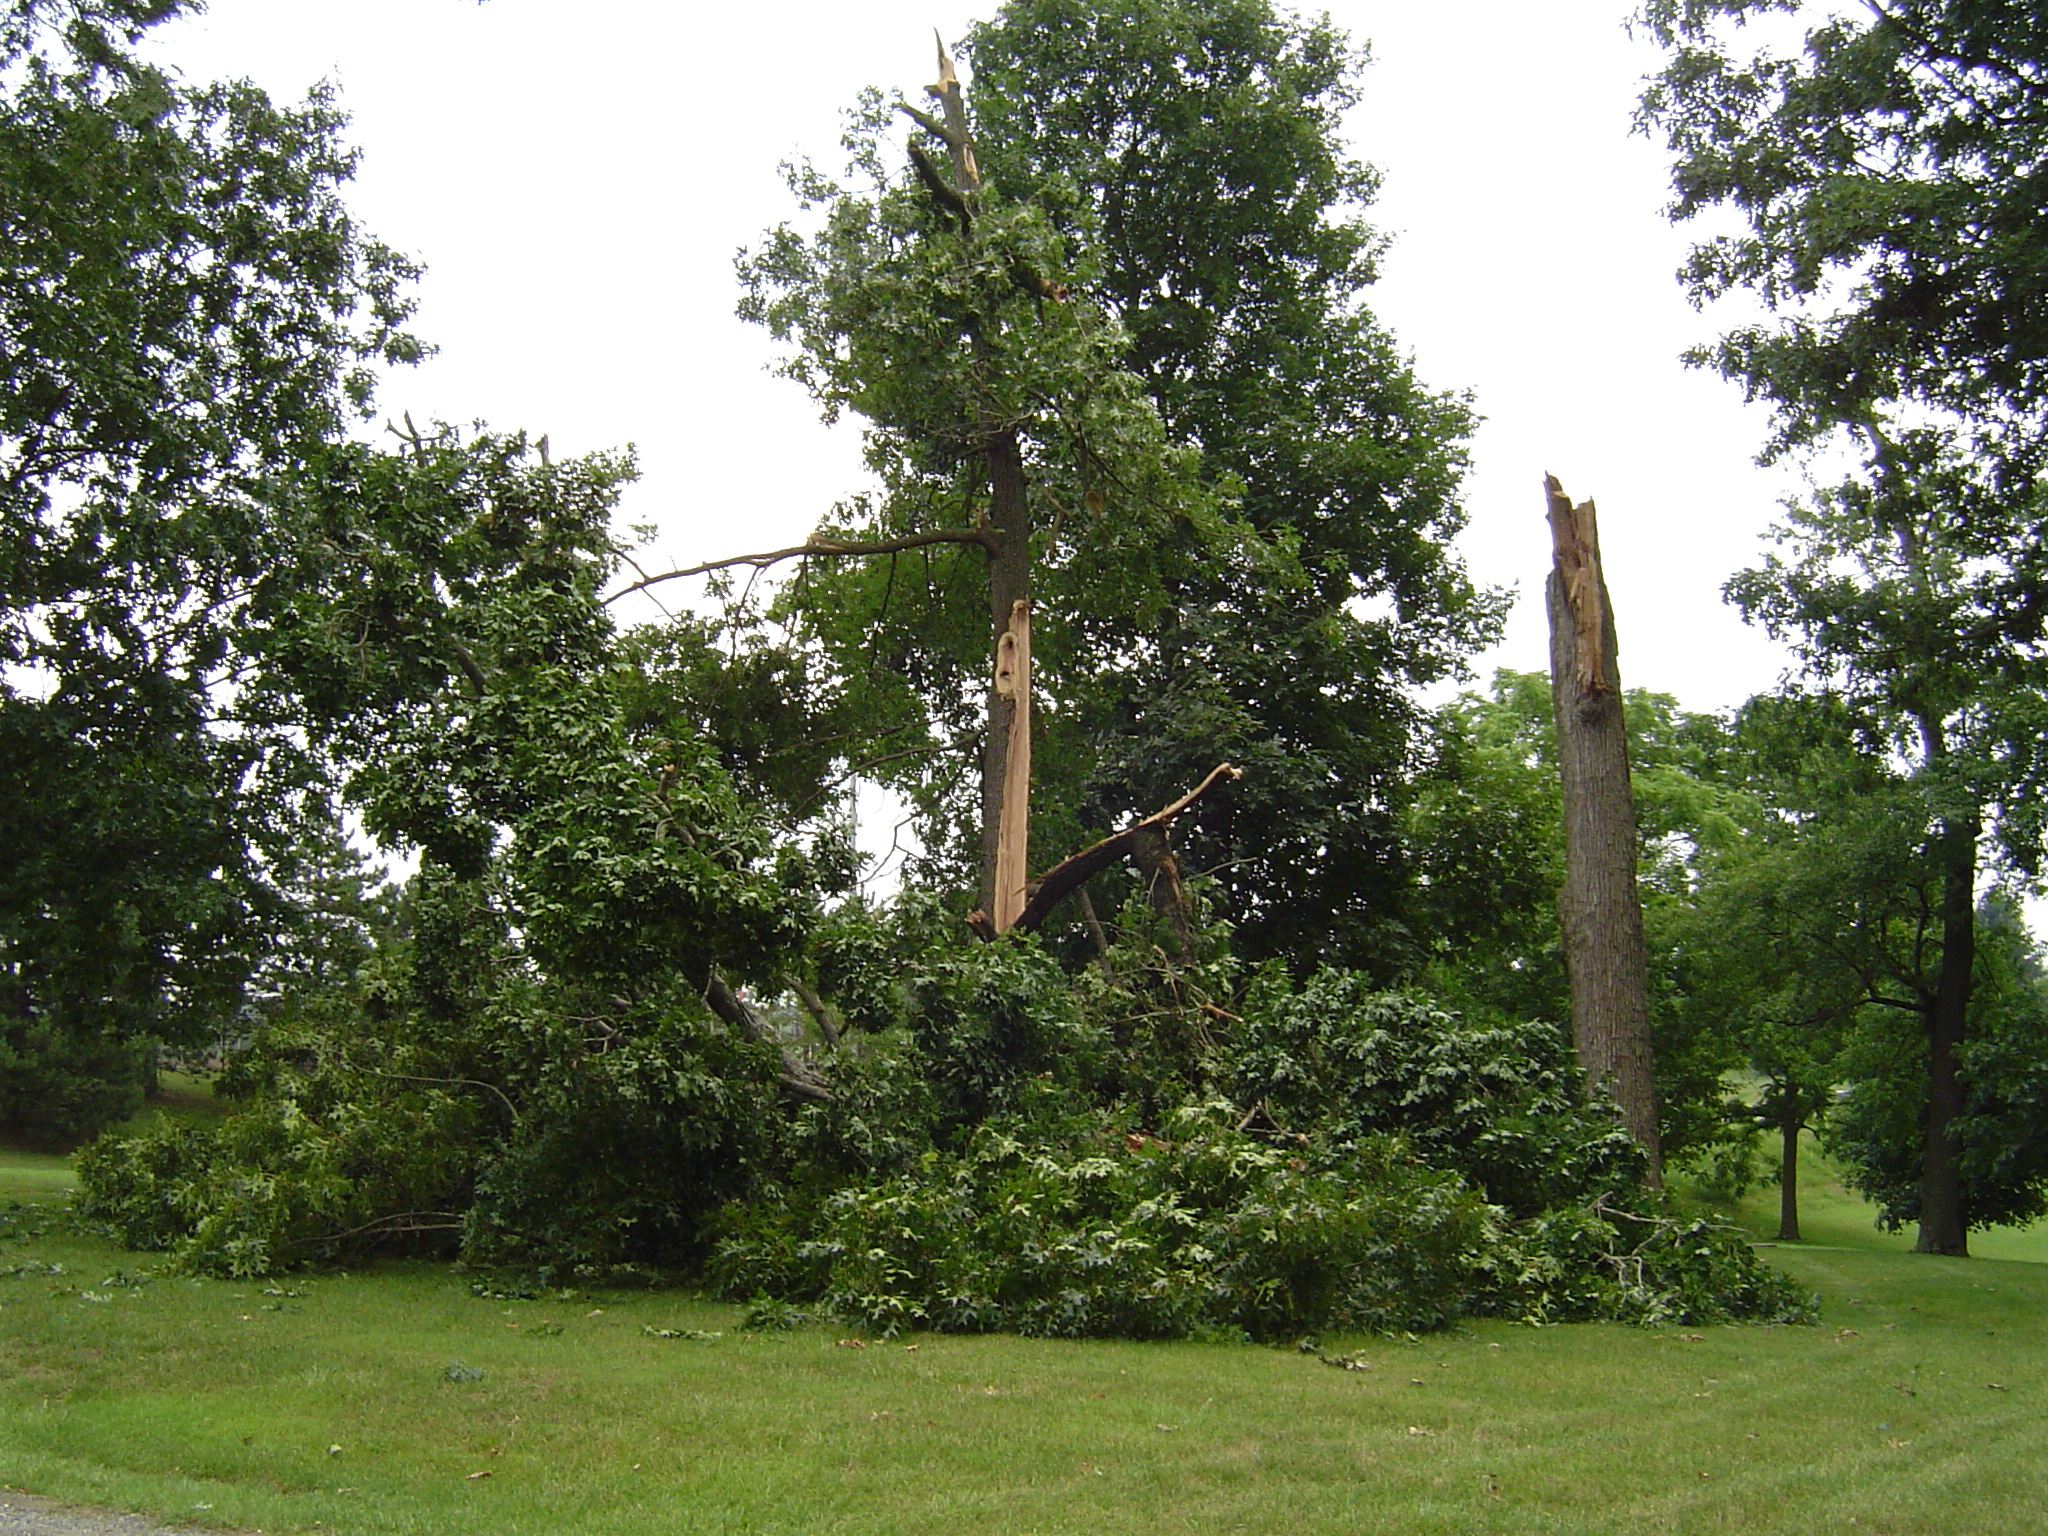 Two trees with broken trunks, with standing trees in the background.